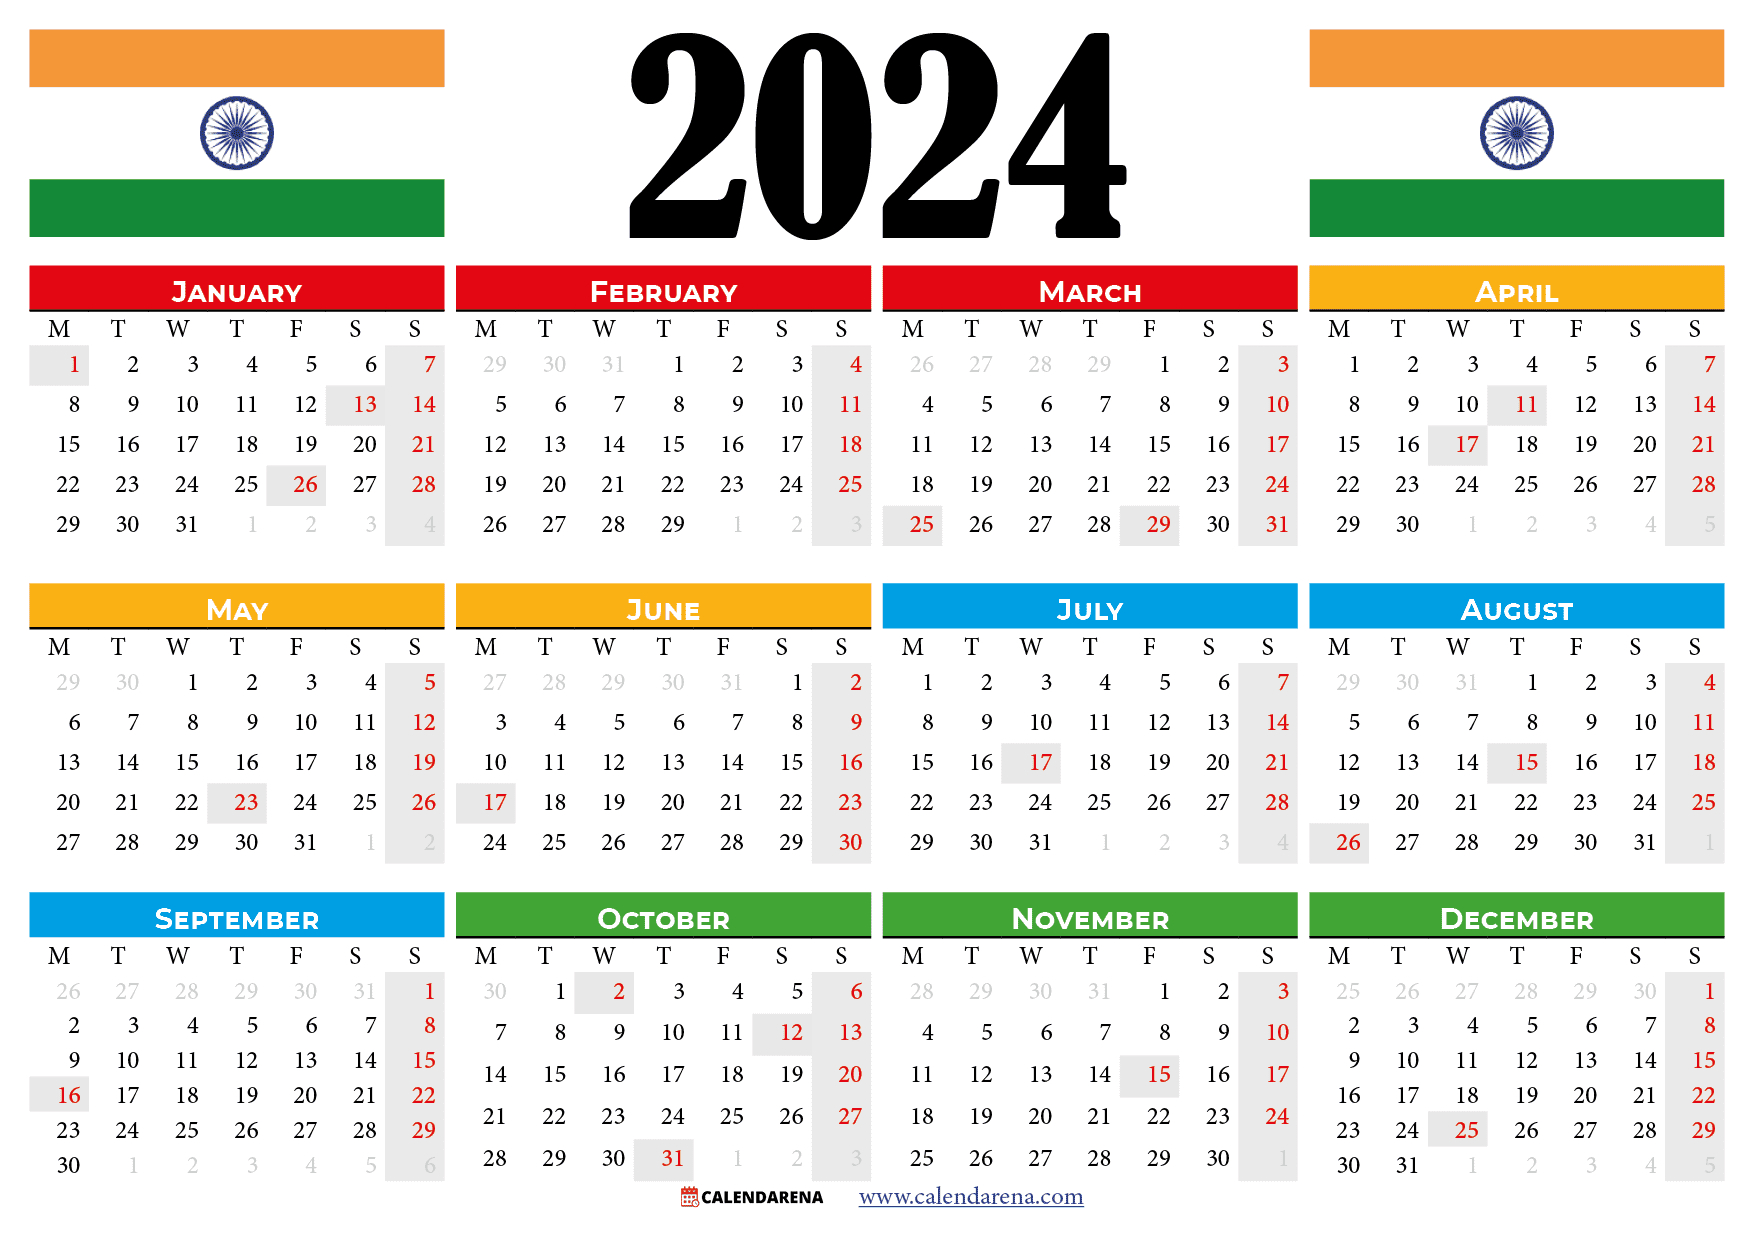 Calendar 2024 India With Holidays And Festivals | Printable Calendar 2024 India With Holidays And Festivals